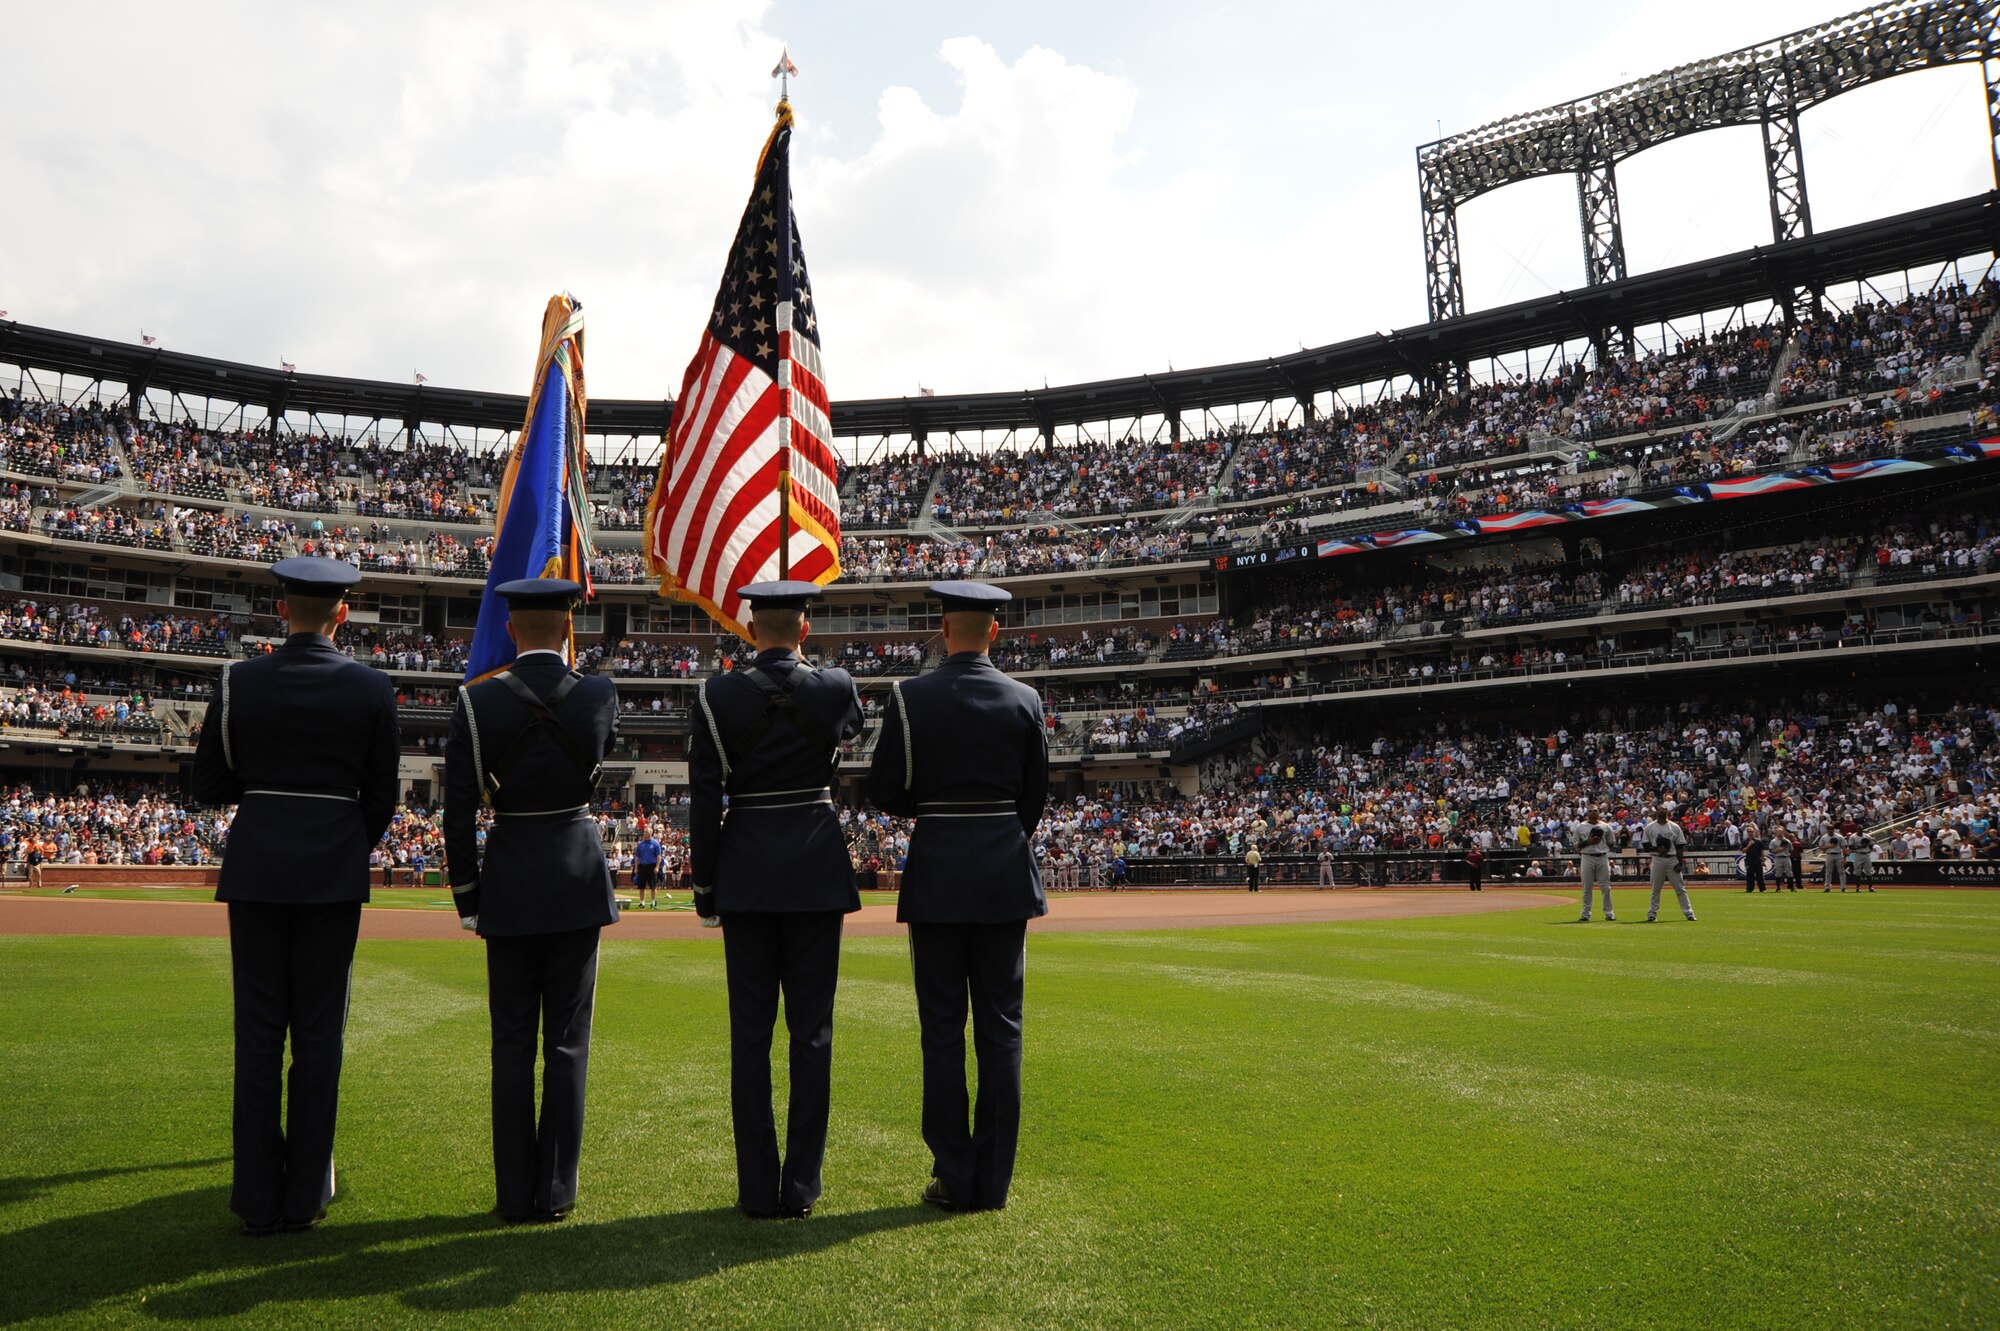 The U.S Air Force Honor Guard color guard presents the nation’s flag to almost 42,000 baseball fans at Citi Field July 2 in New York. The USAF Honor Guard and The U.S. Air Force Band were invited to perform at the Mets vs. Yankees game in celebration of the Independence Day weekend. (U.S. Air Force photo by Staff Sgt. Christopher Ruano)